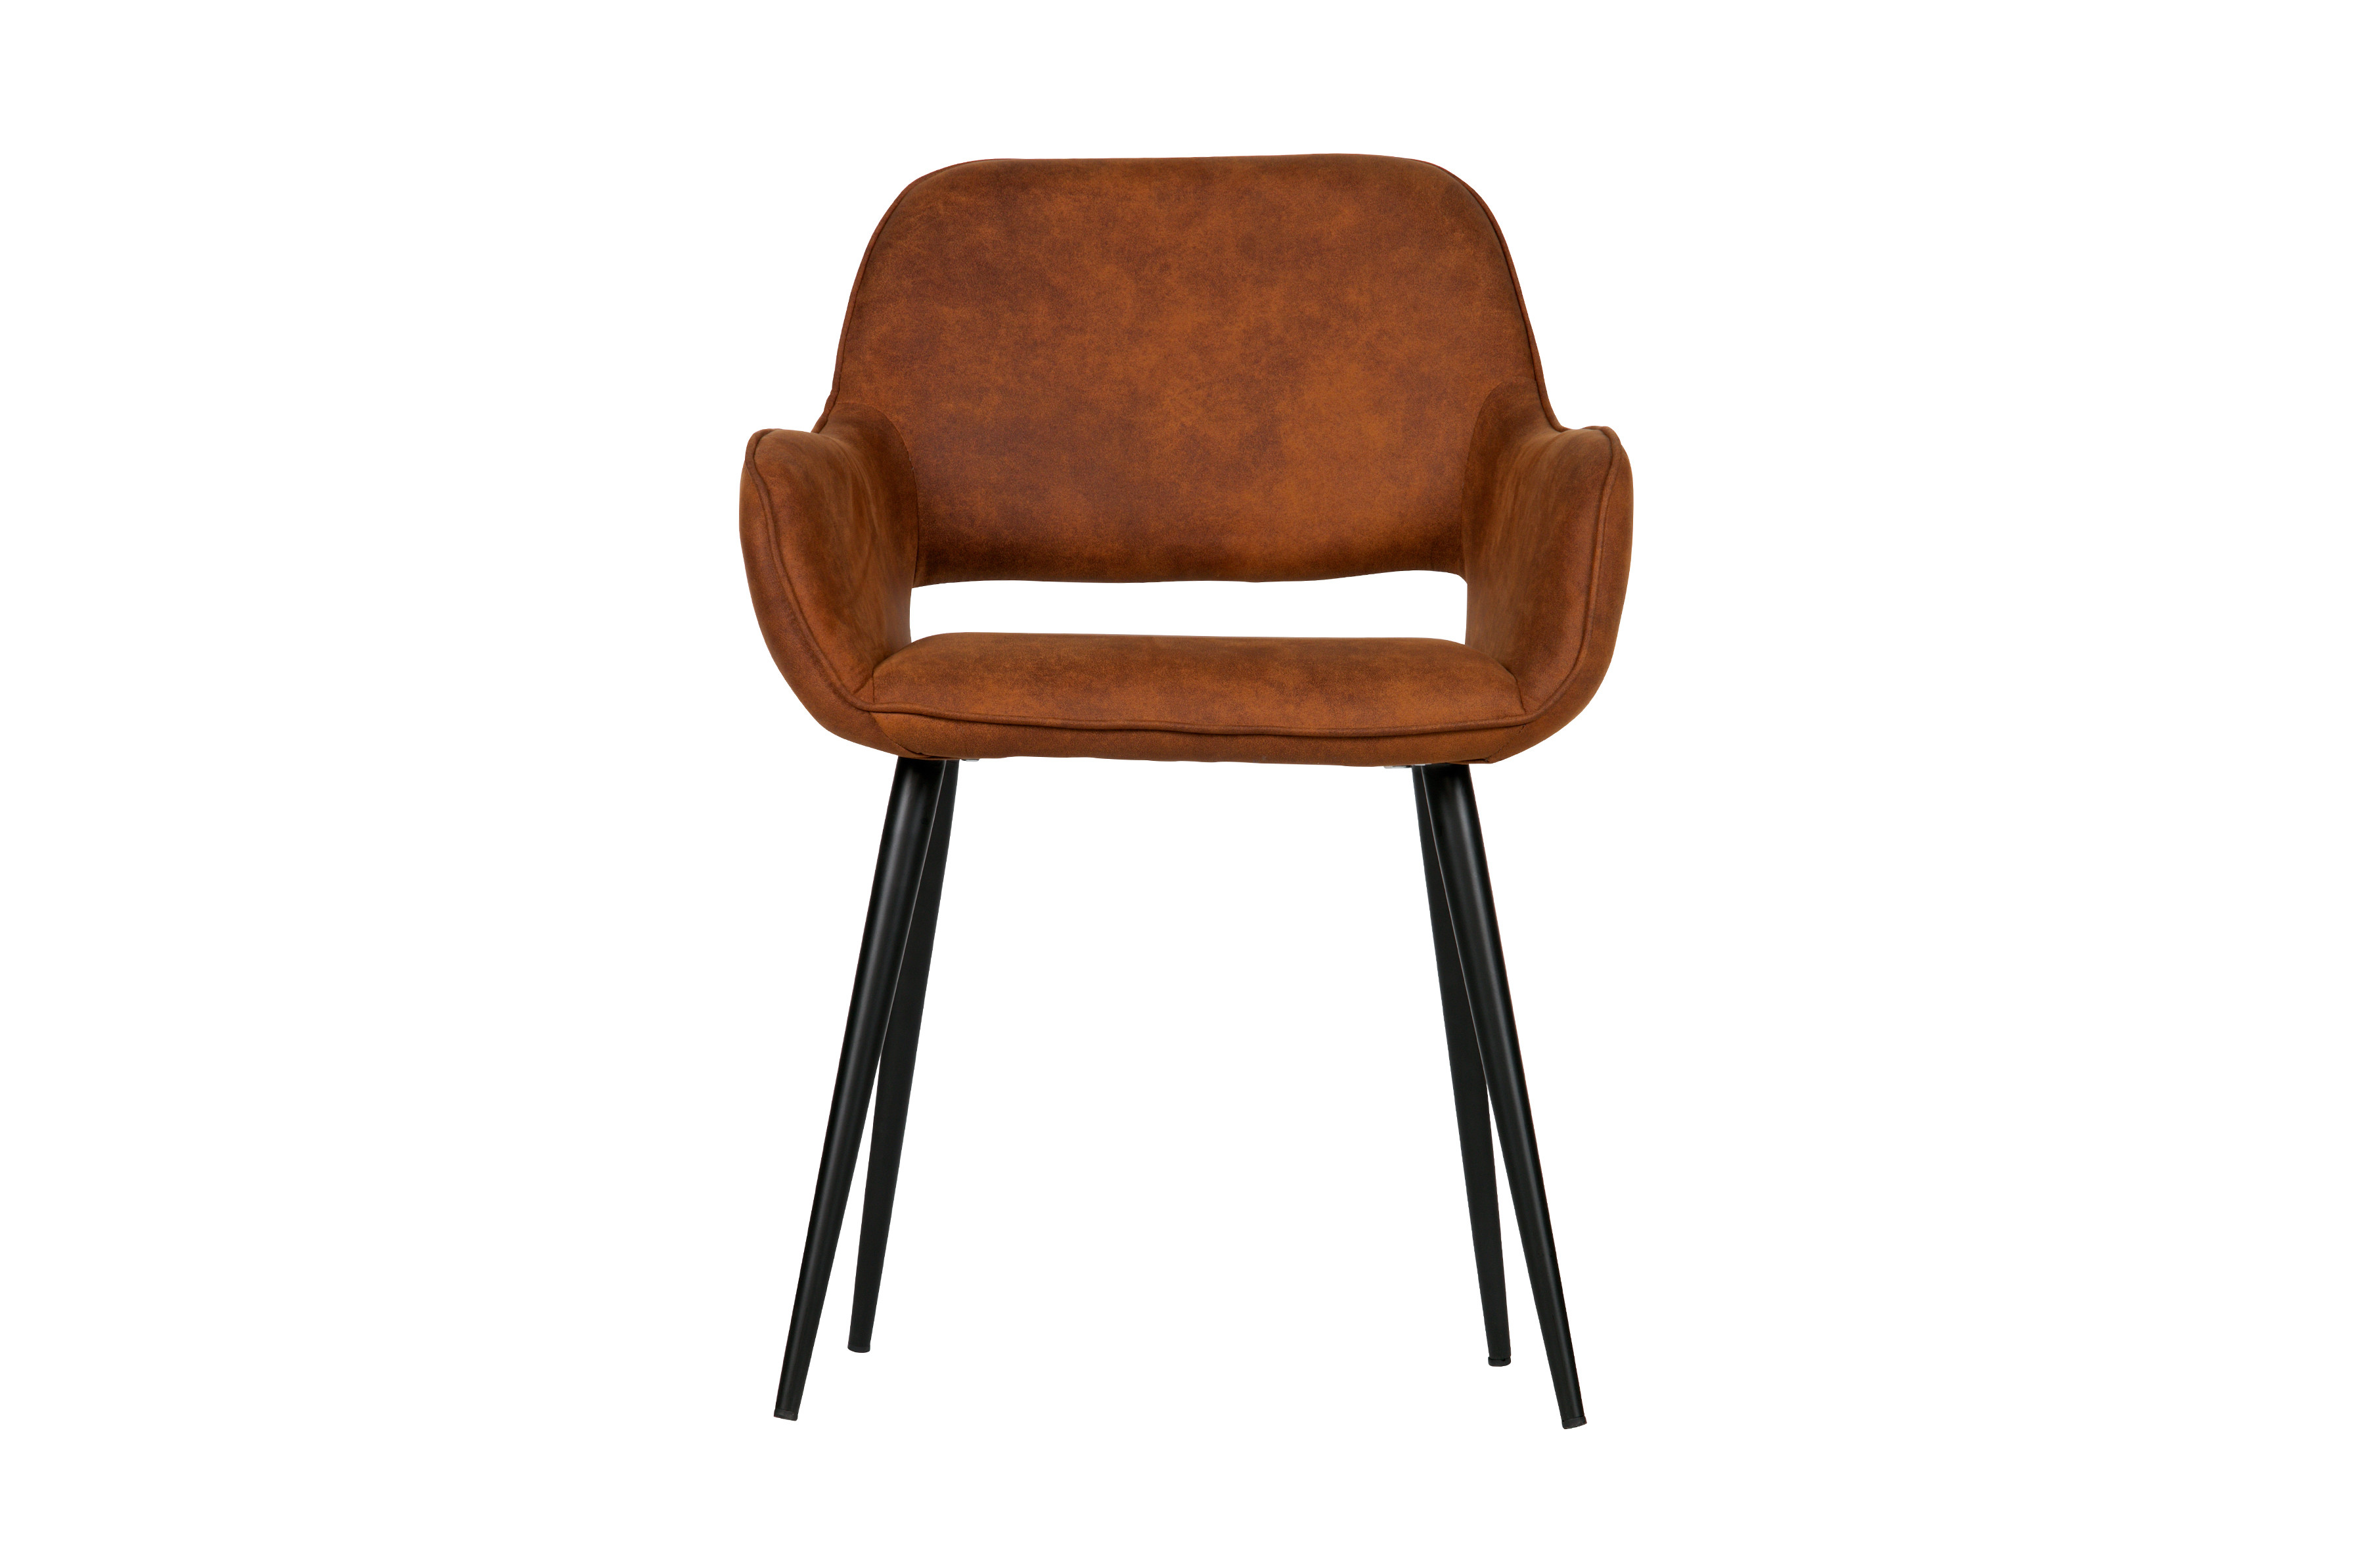 Rent a Dining chair Jelle cognac? Rent at KeyPro furniture rental!